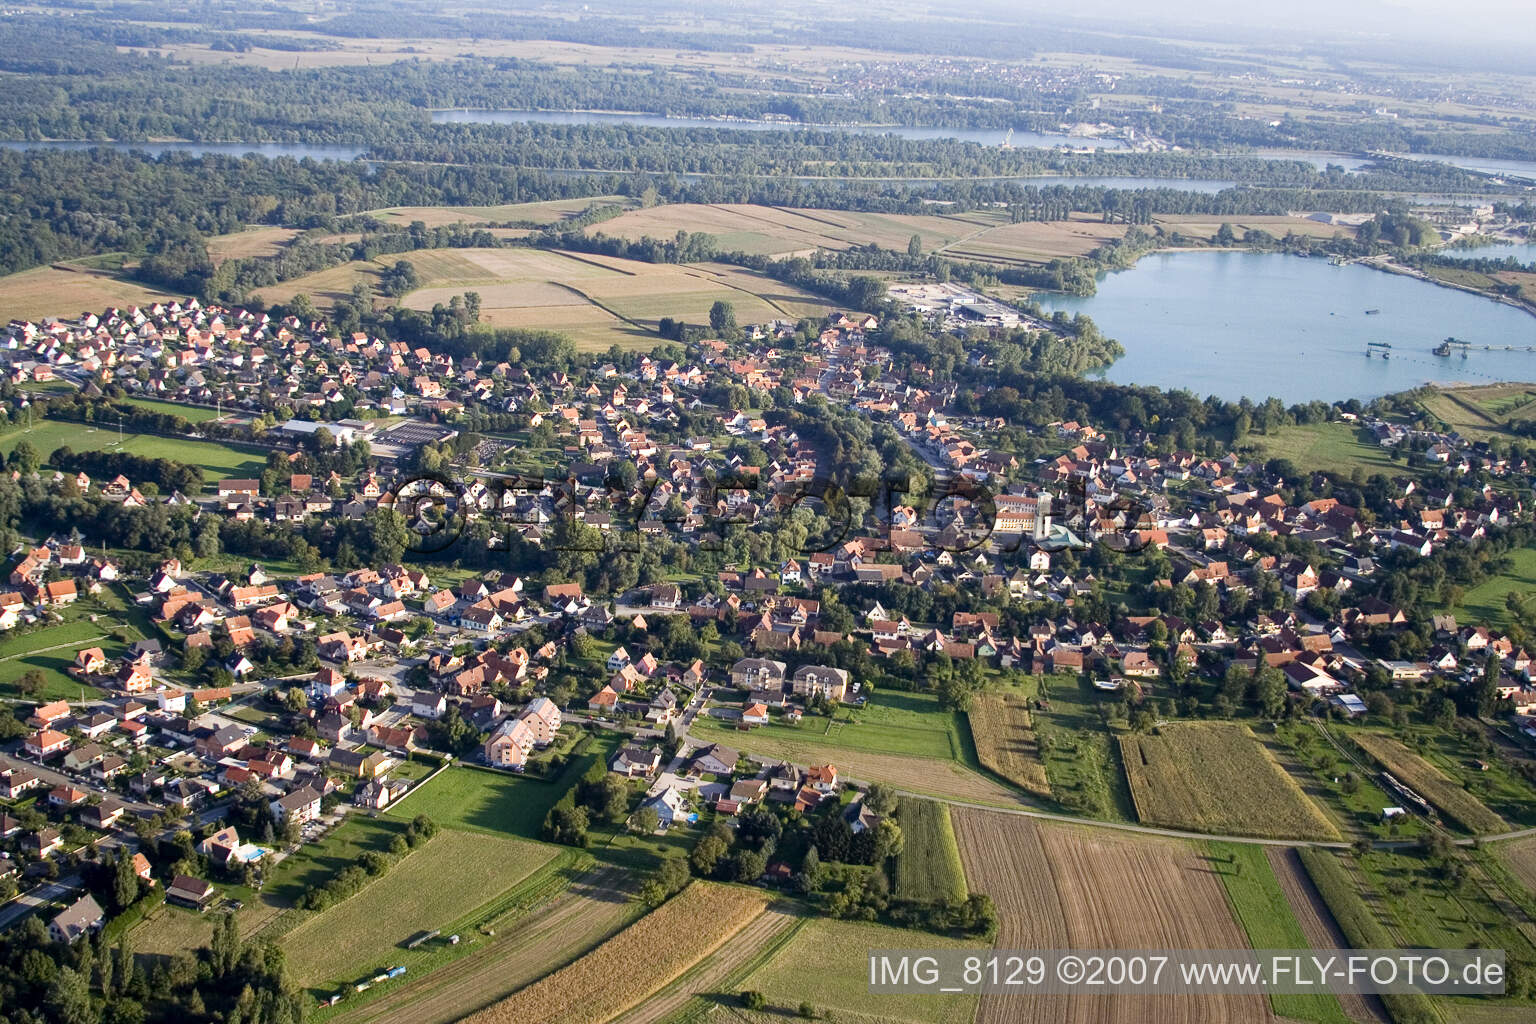 Offendorf in the state Bas-Rhin, France seen from a drone